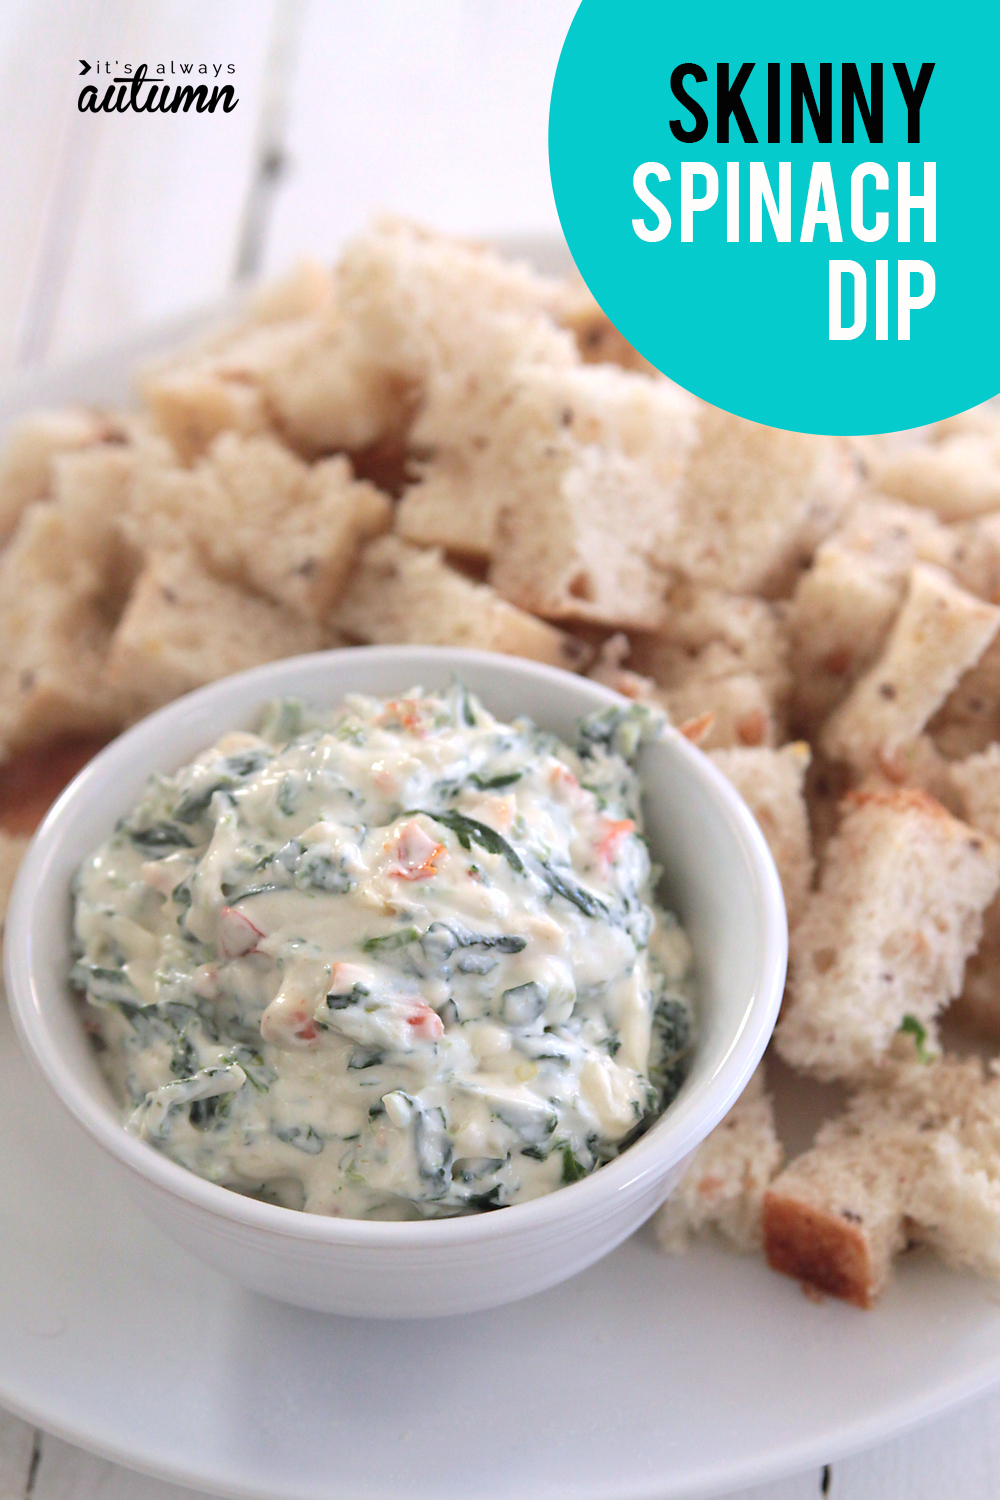 This skinny spinach dip has just a quarter the calories of the original! Perfect light dip for holidays and parties.